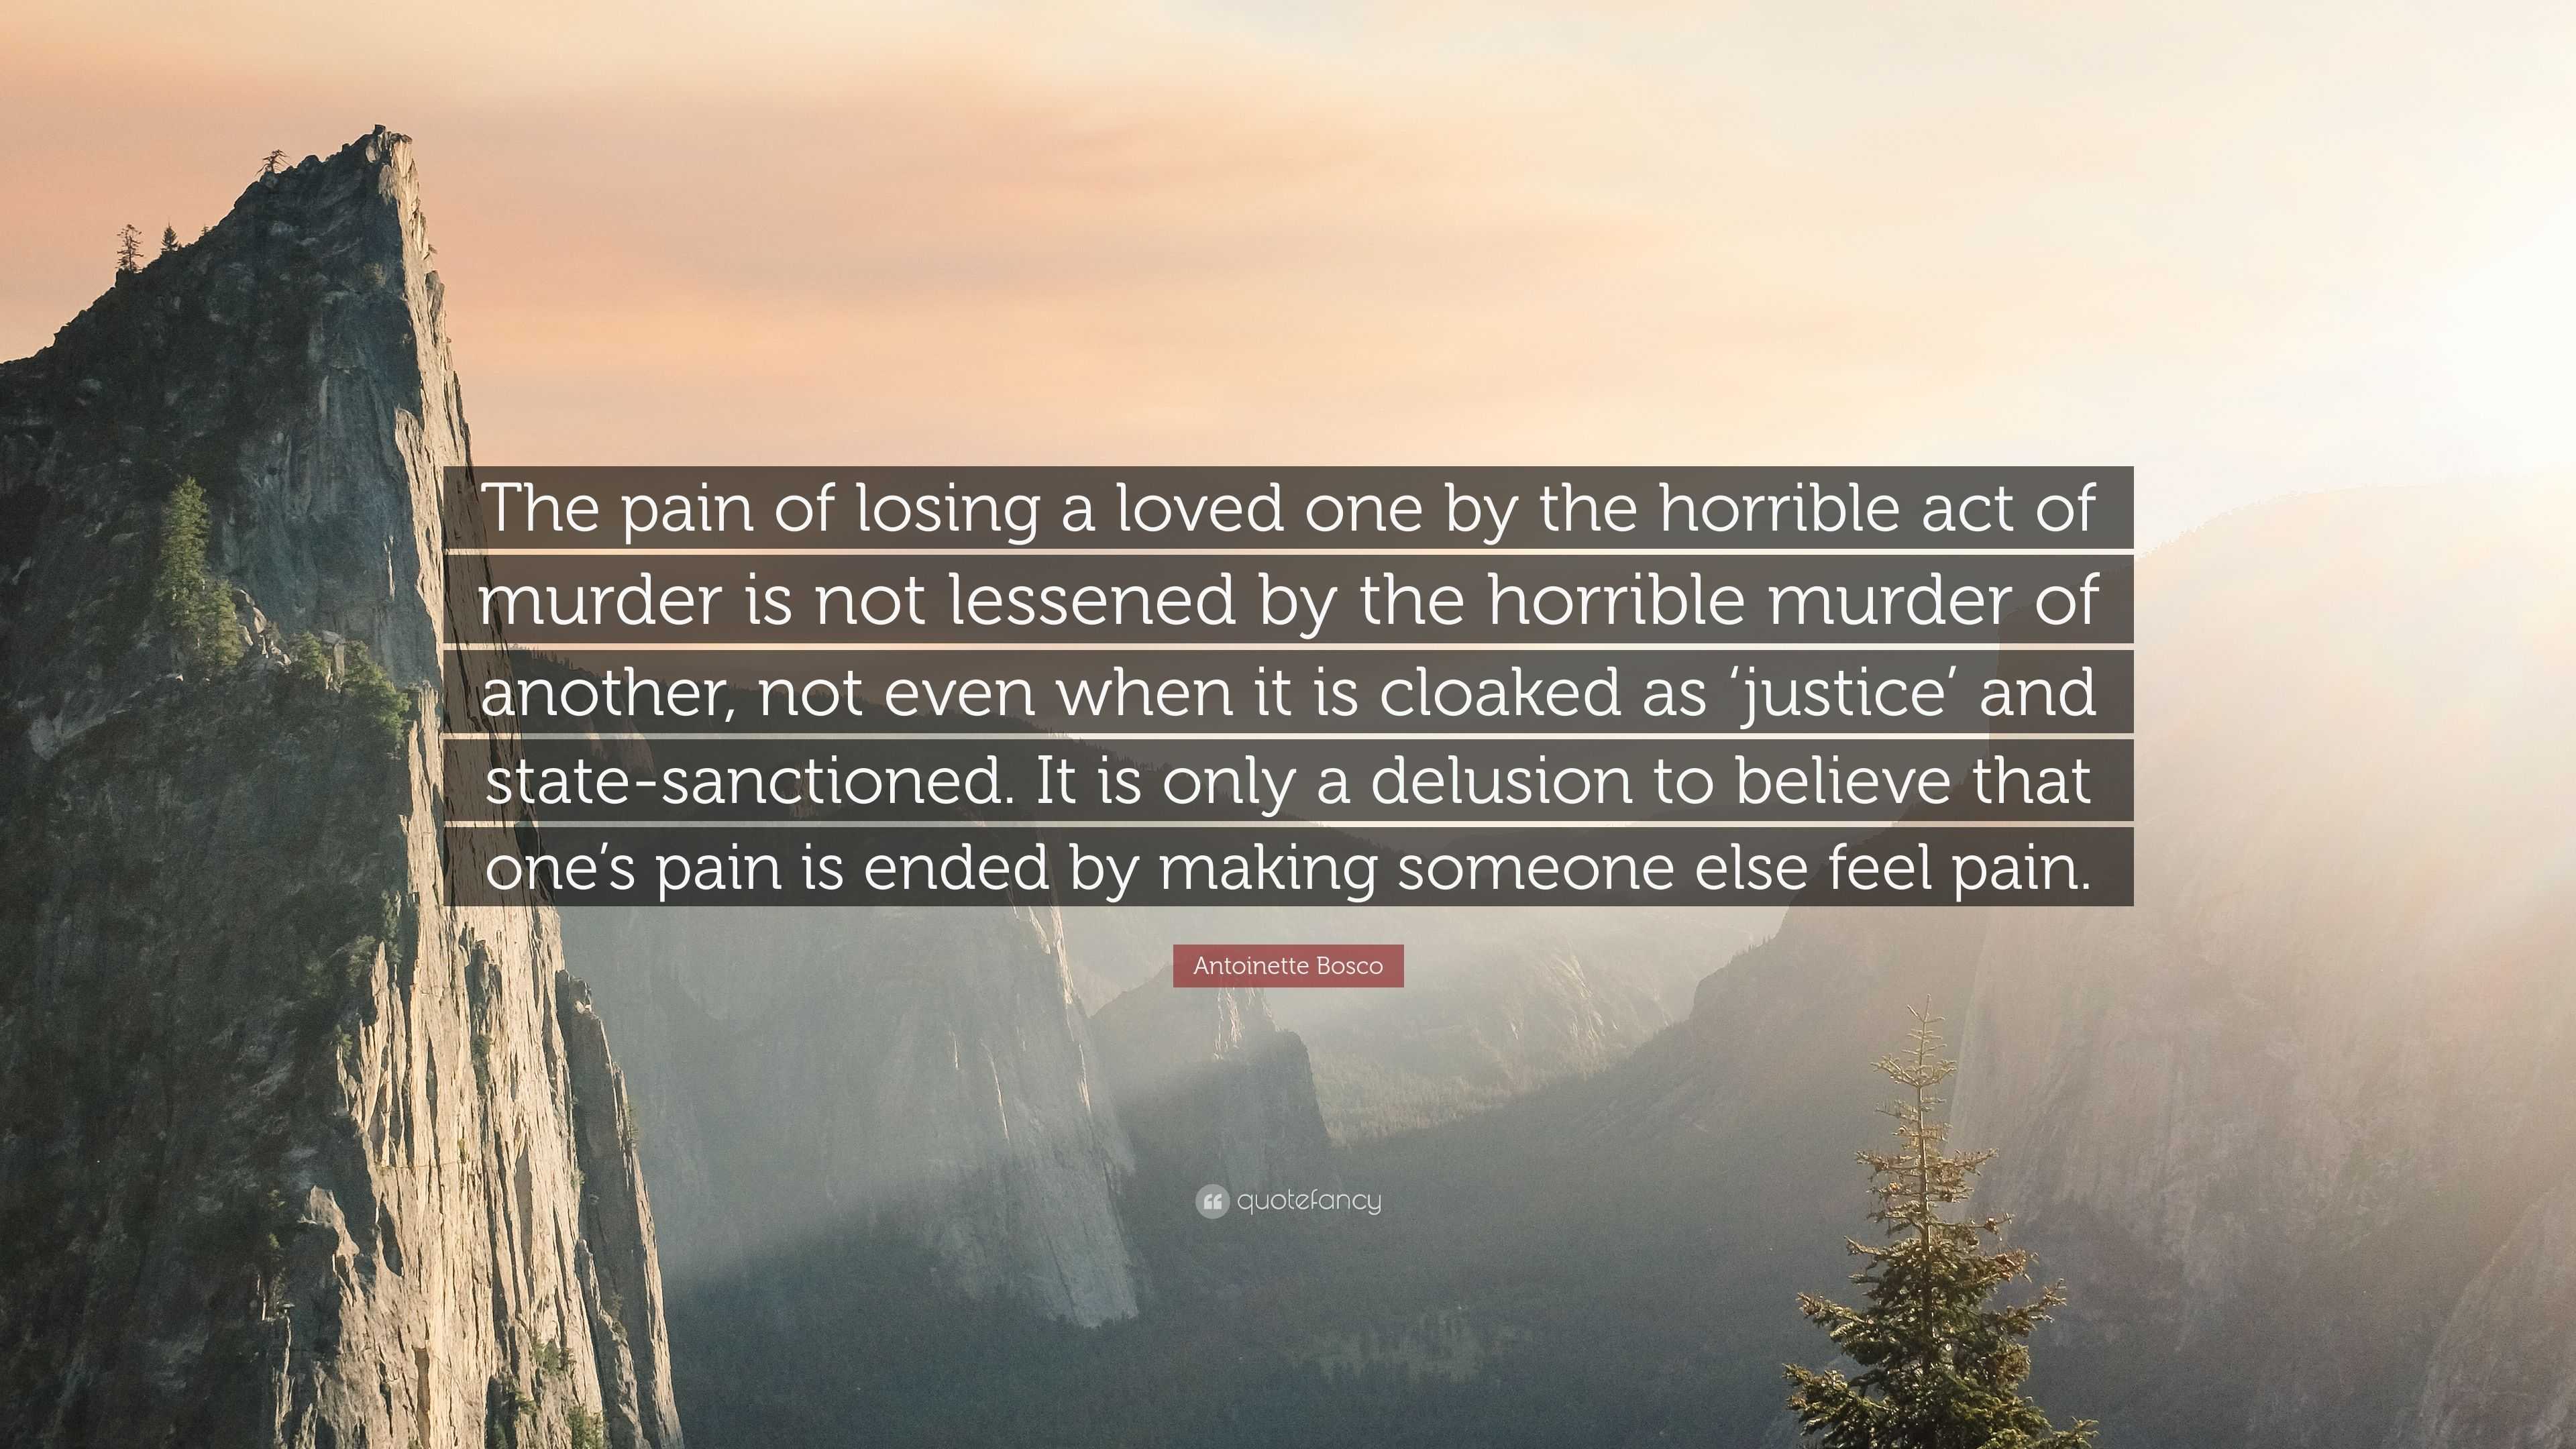 Antoinette Bosco Quote: “The pain of losing a loved one by the horrible act  of murder is not lessened by the horrible murder of another, not even...”